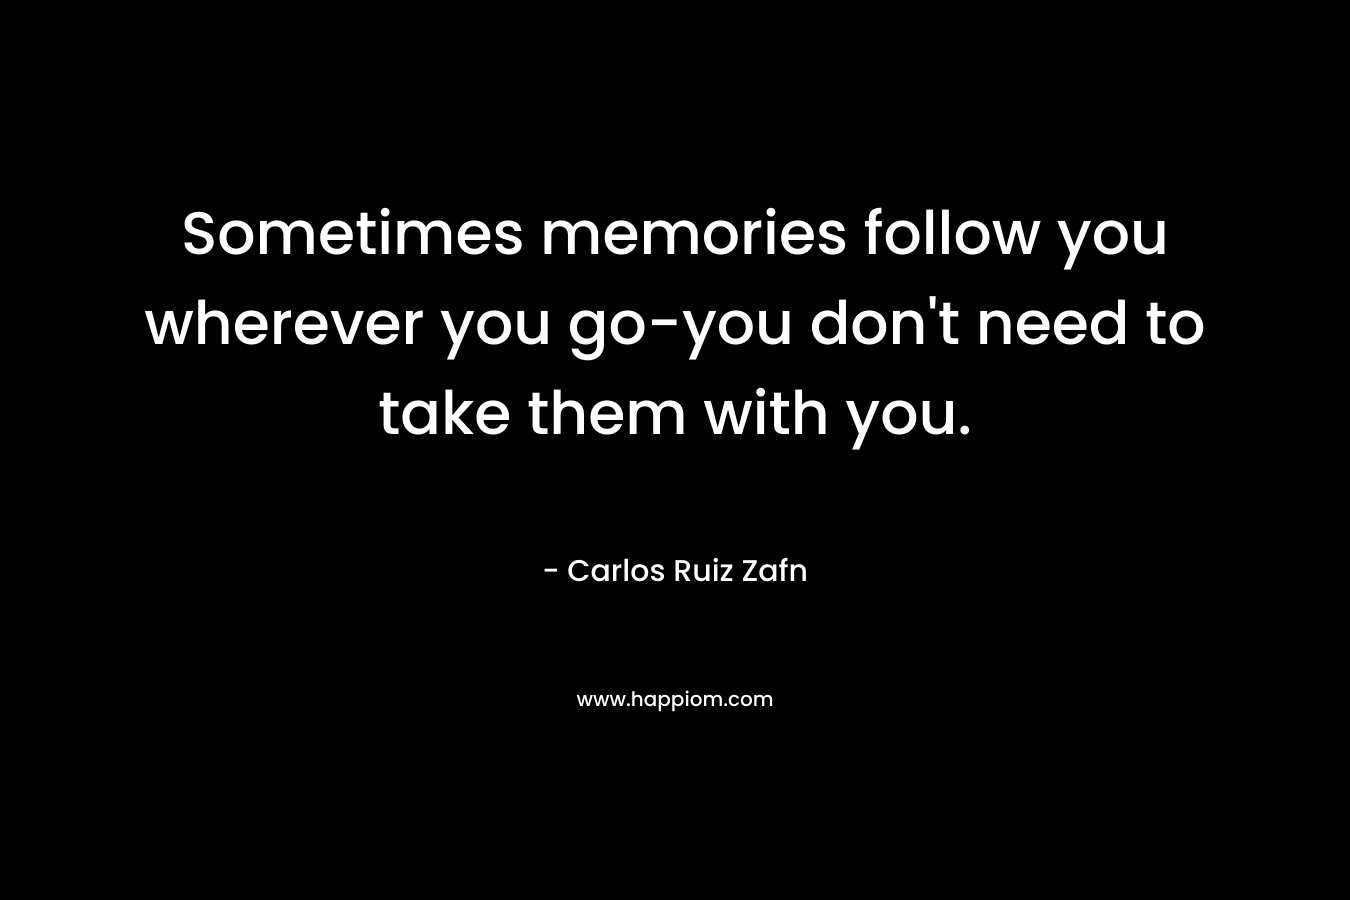 Sometimes memories follow you wherever you go-you don’t need to take them with you. – Carlos Ruiz Zafn